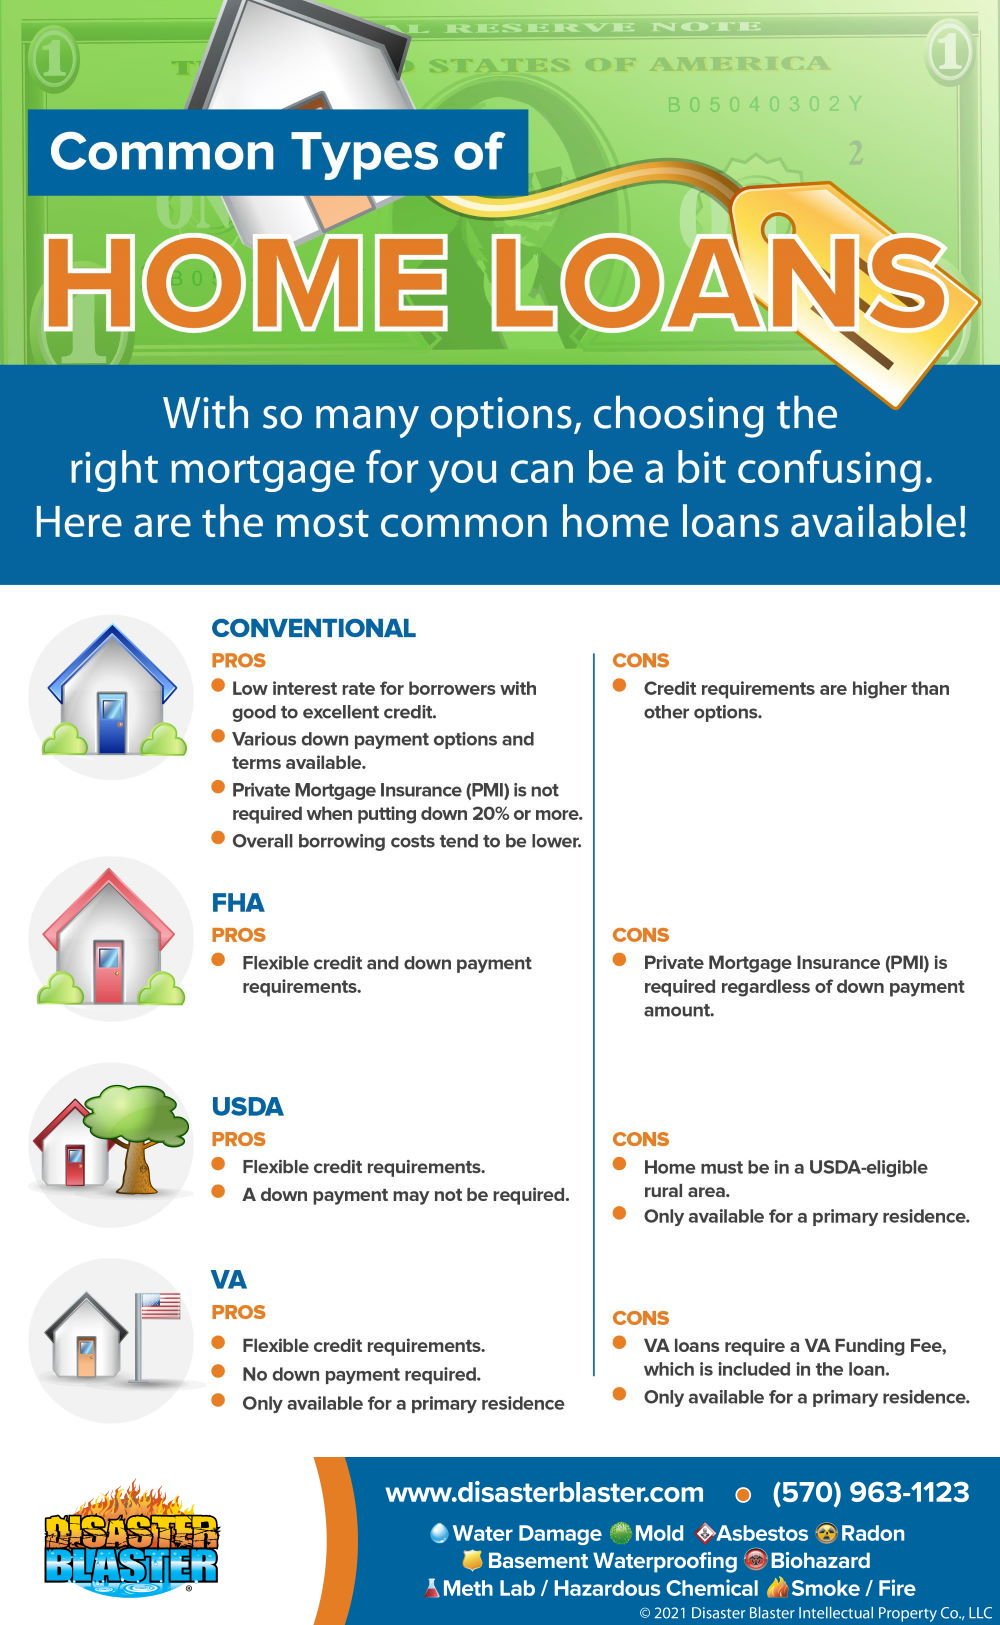 Common Types of Home Loans Infographic